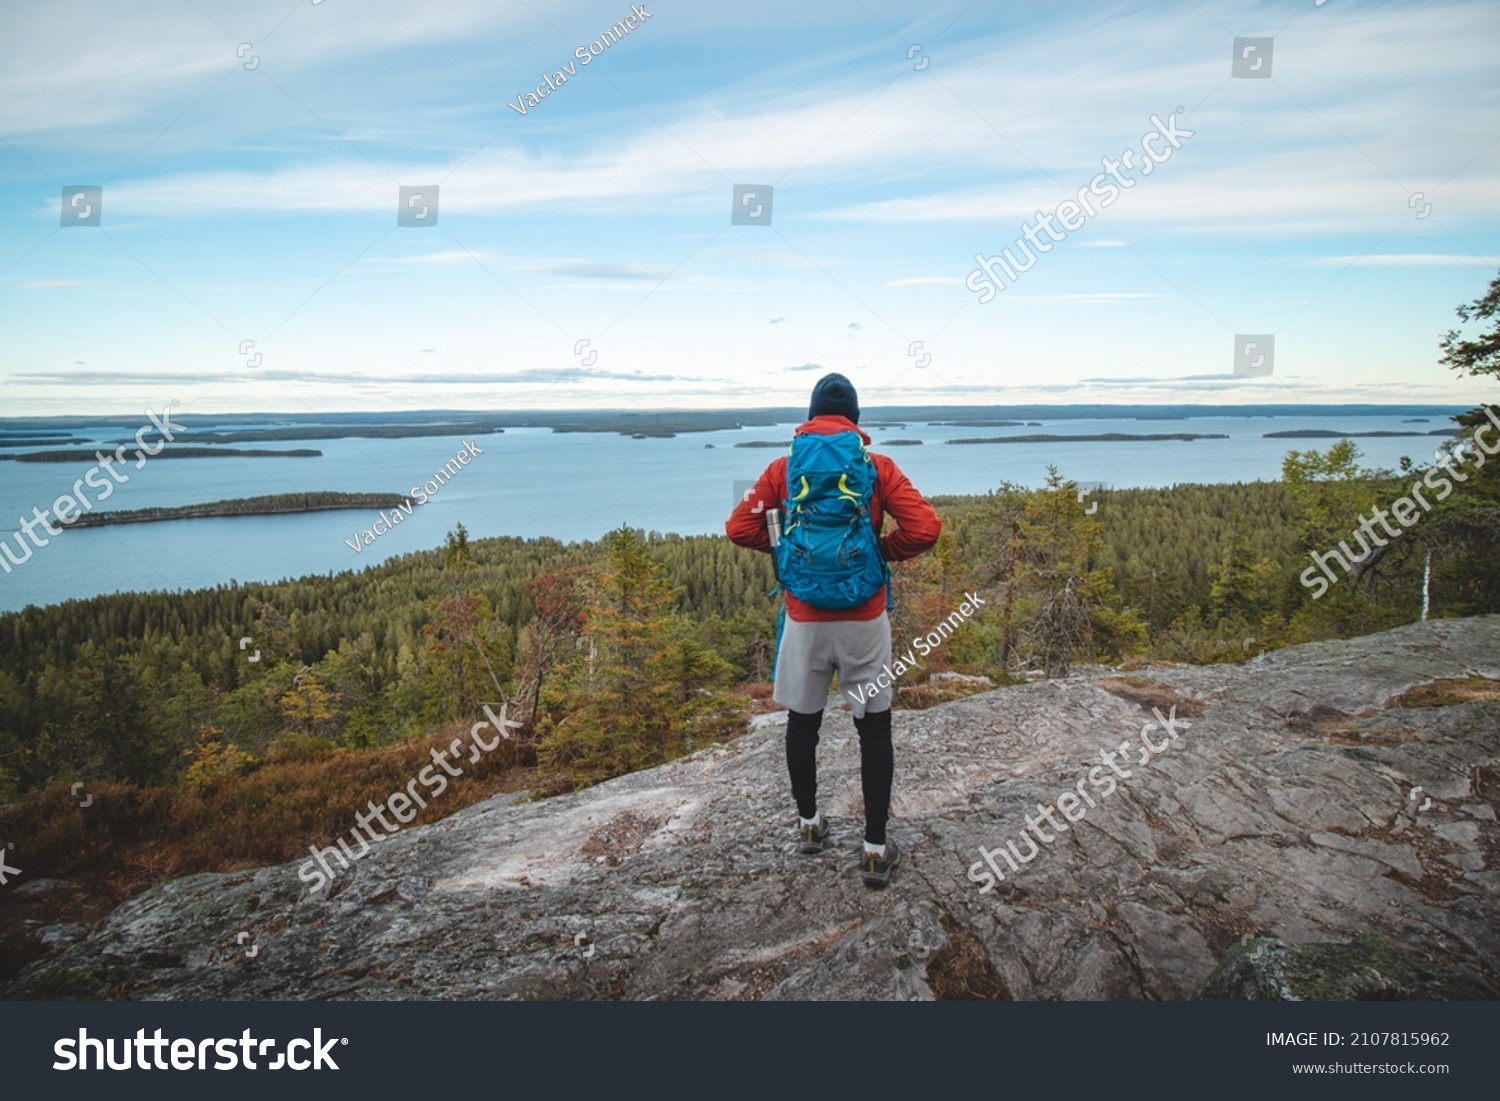 hiker wearing a jacket and carrying a backpack, standing on a rock watching Lake Jatkonjarvi at sunset in Koli National Park, eastern Finland. A man aged 24 wearing sports clothes. Active lifestyle. #2107815962